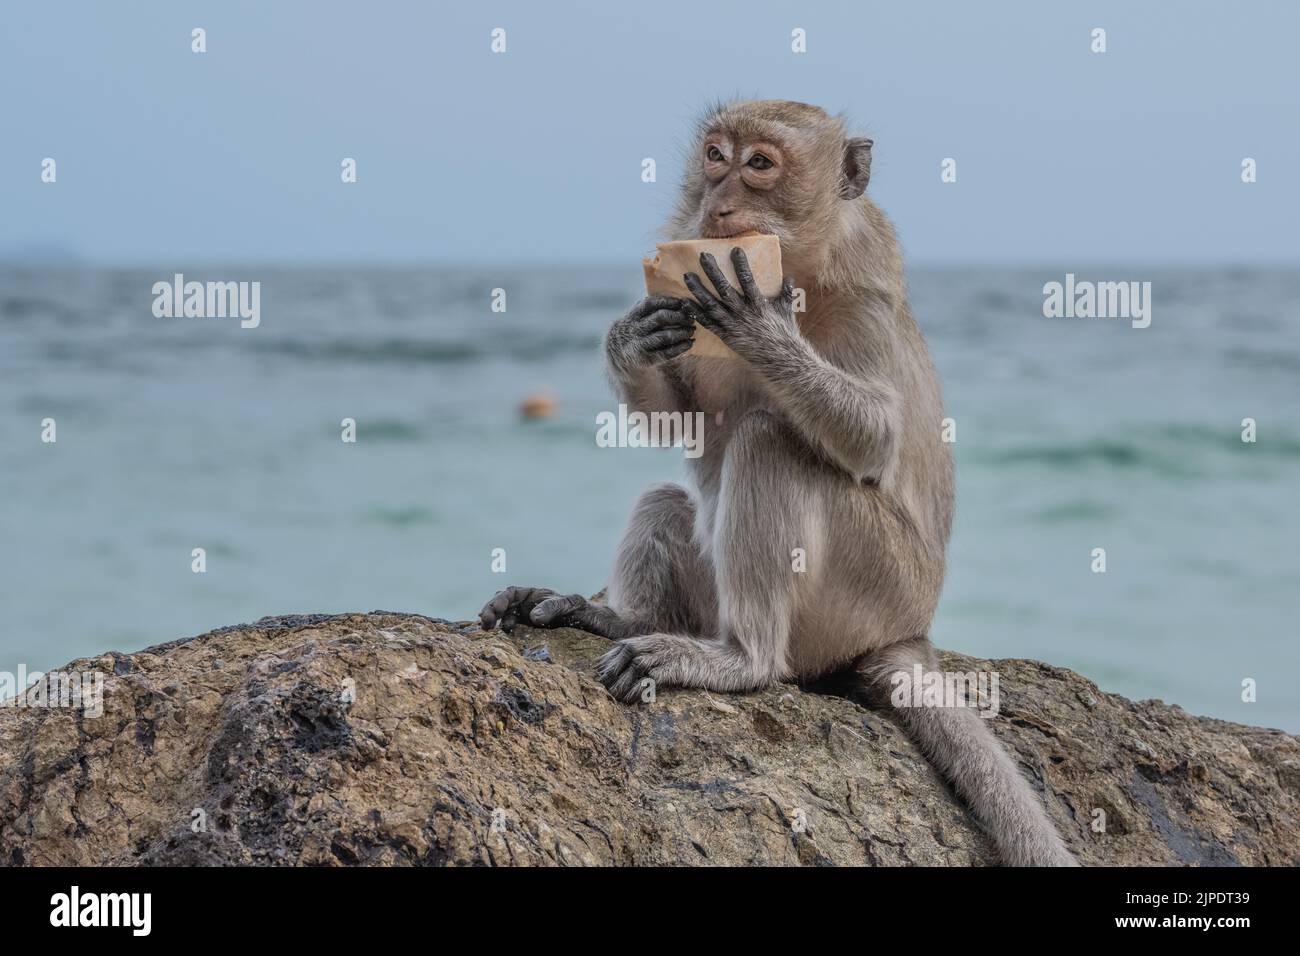 Photoshoot with Alissa and a Genommen monkey on Koh Larn Island Region of Thailand in the eastern part of the Central Region Stock Photo